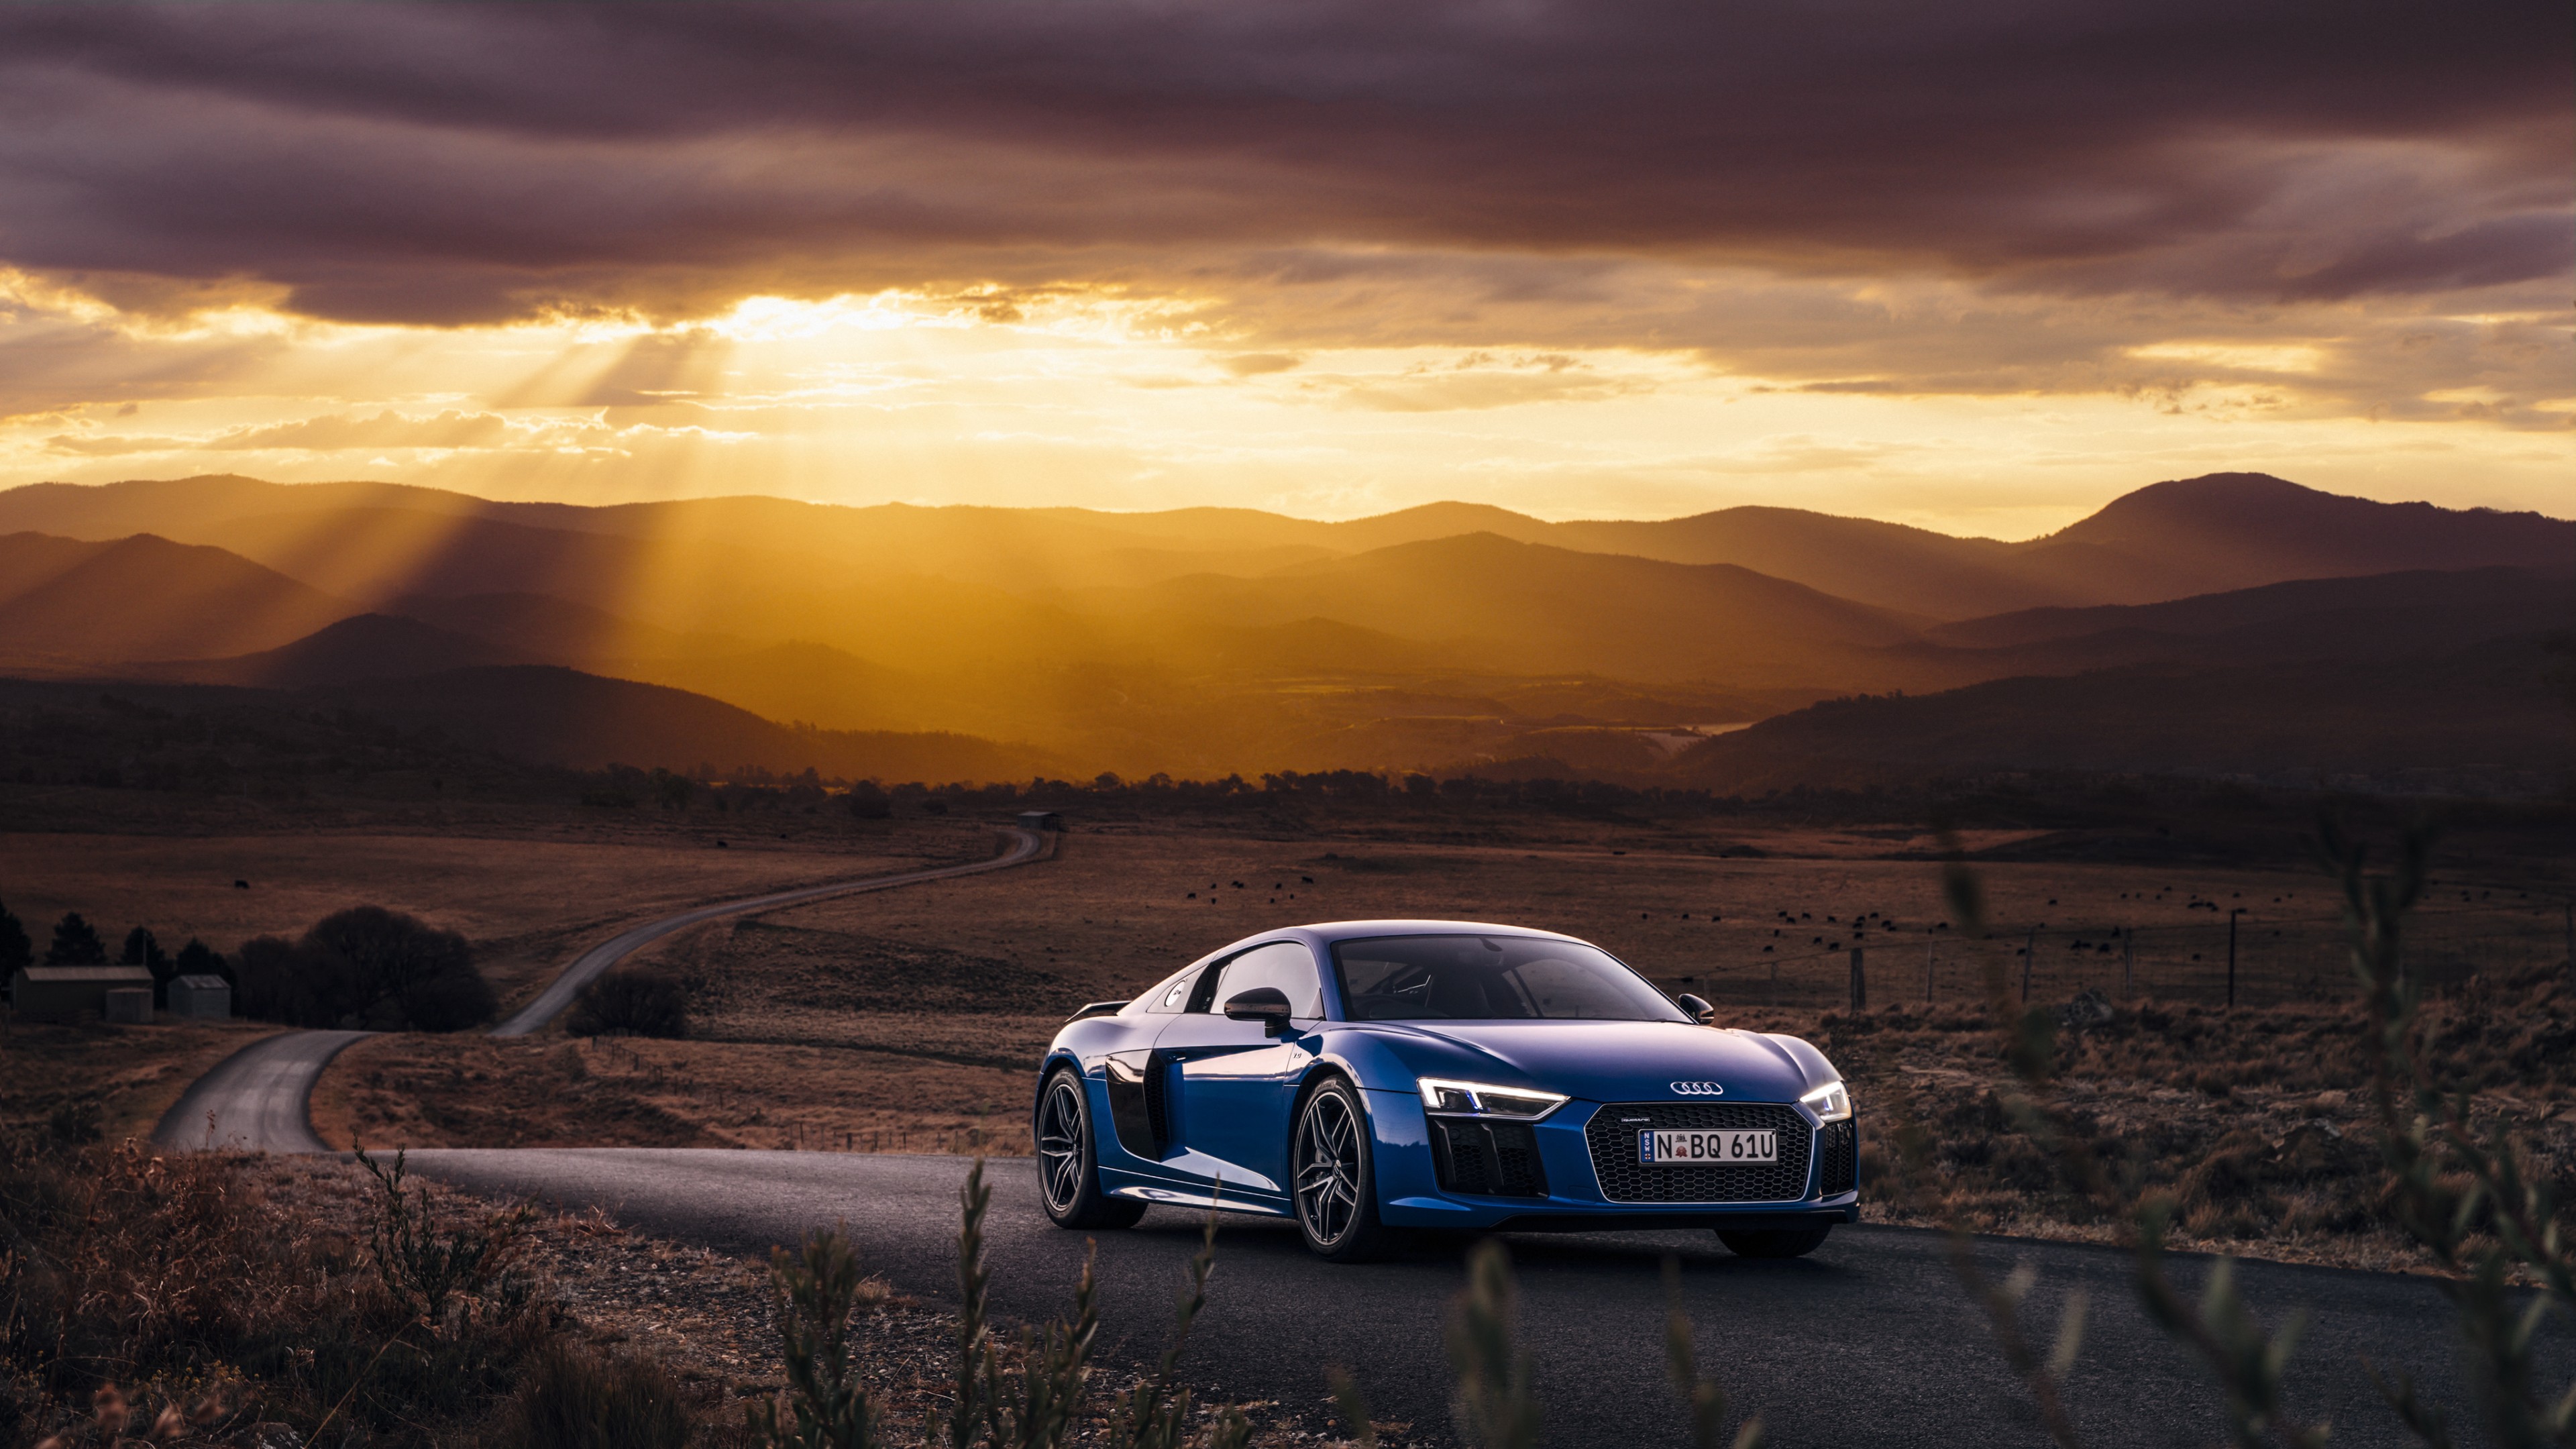 General 3840x2160 car sports car supercars landscape road clouds Audi Audi R8 field mountains hills sun rays plants blue cars vehicle frontal view